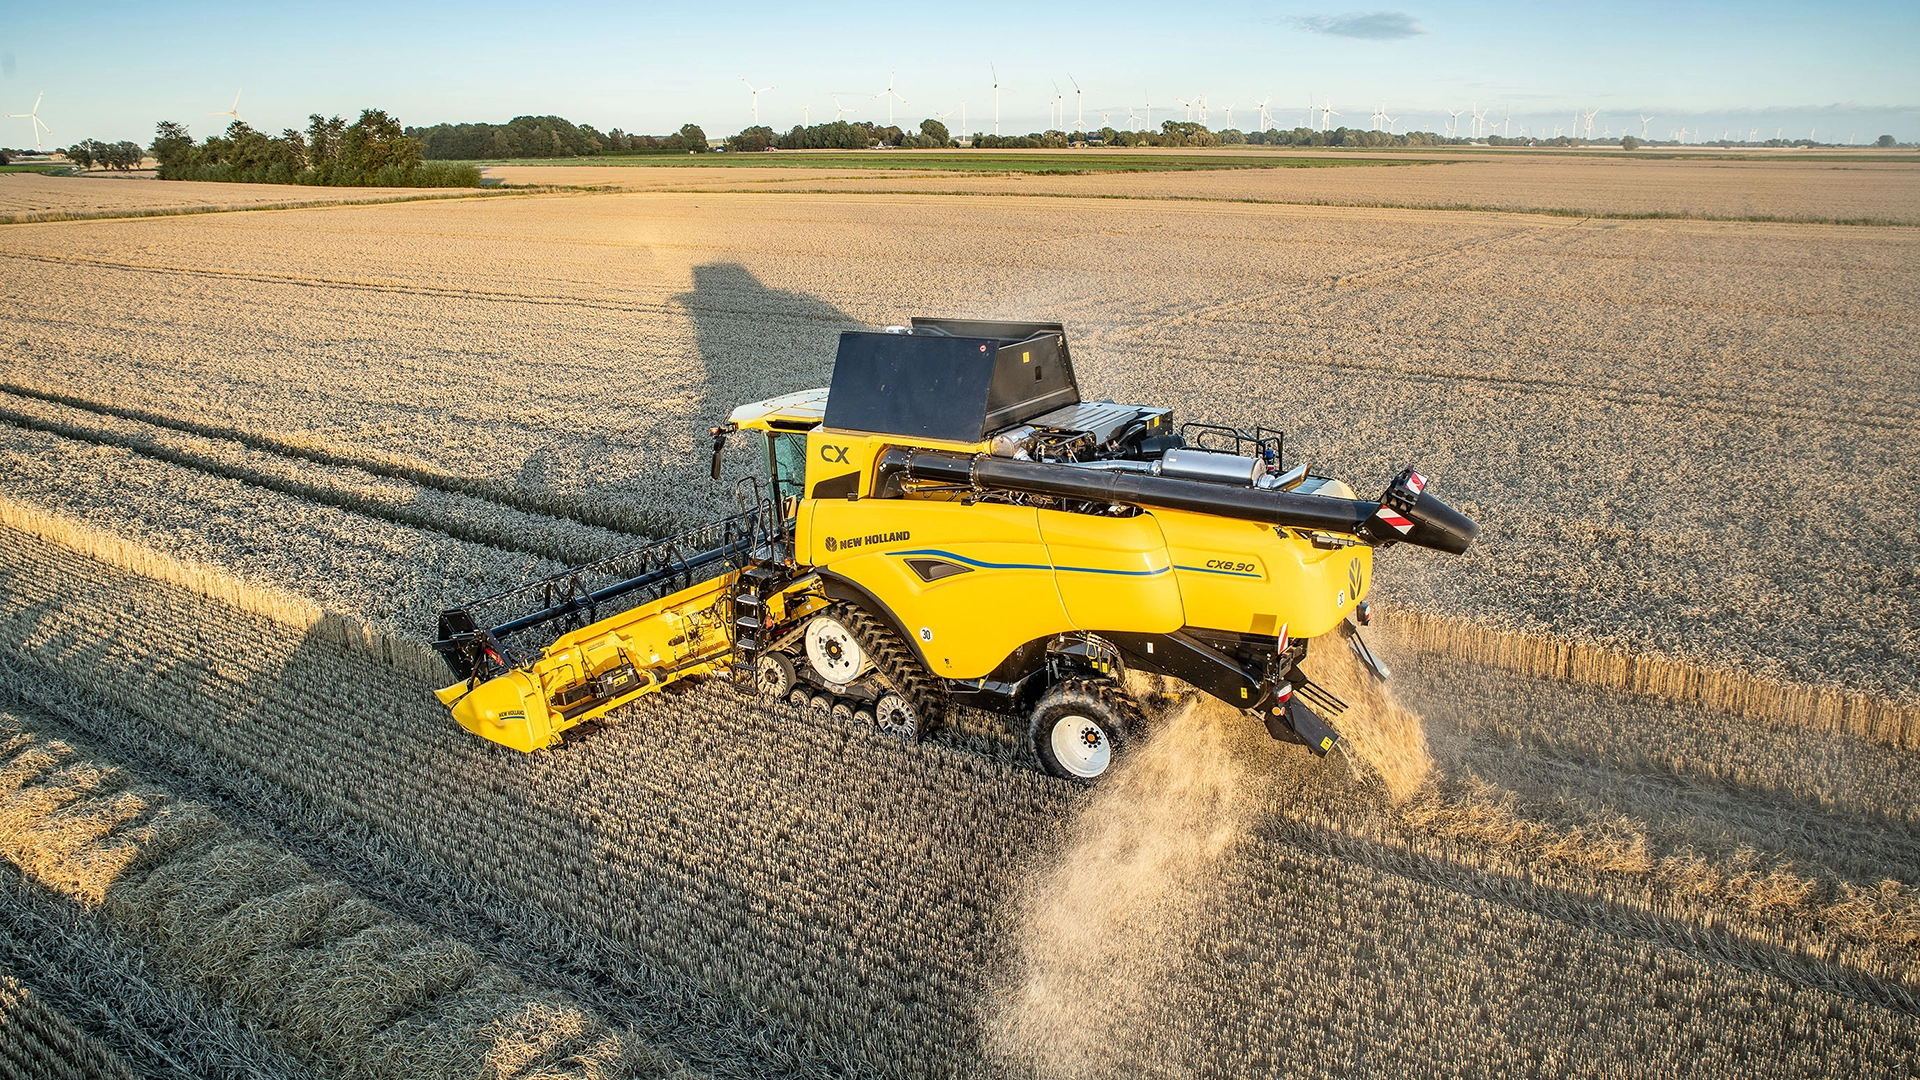 Efficient crop harvesting in progress with New Holland's CX7 & CX8 combines and their advanced headers